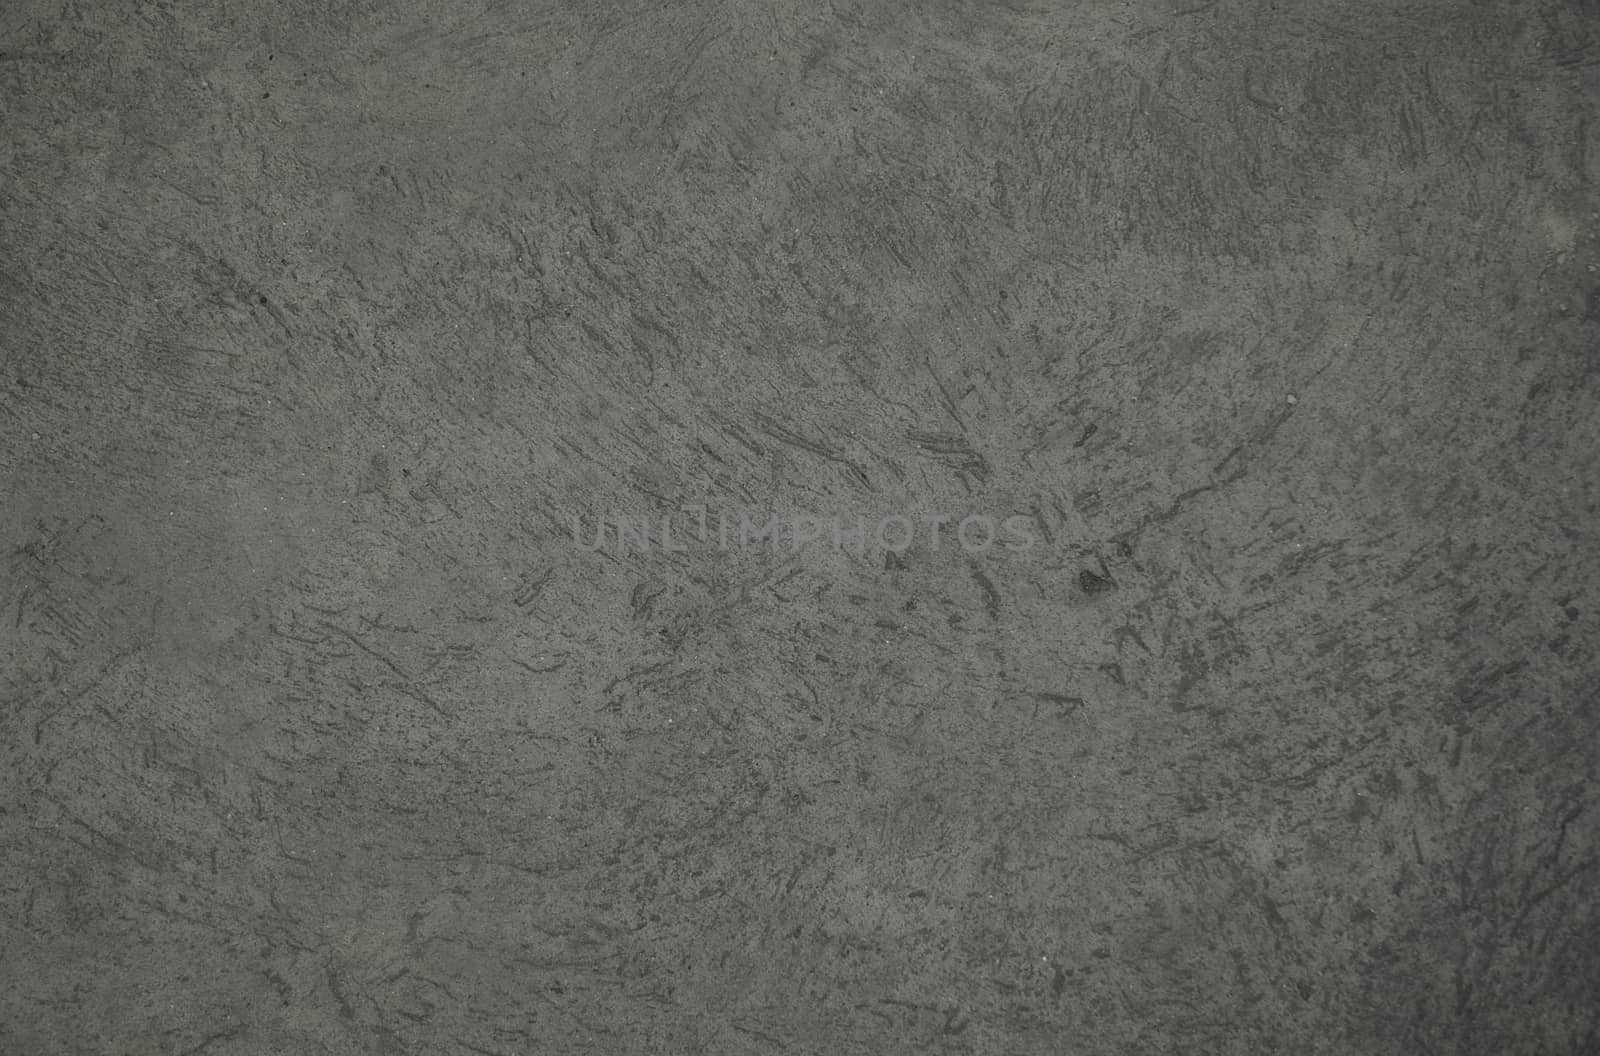 Grungy gray concrete floor texture background by Urvashi-A